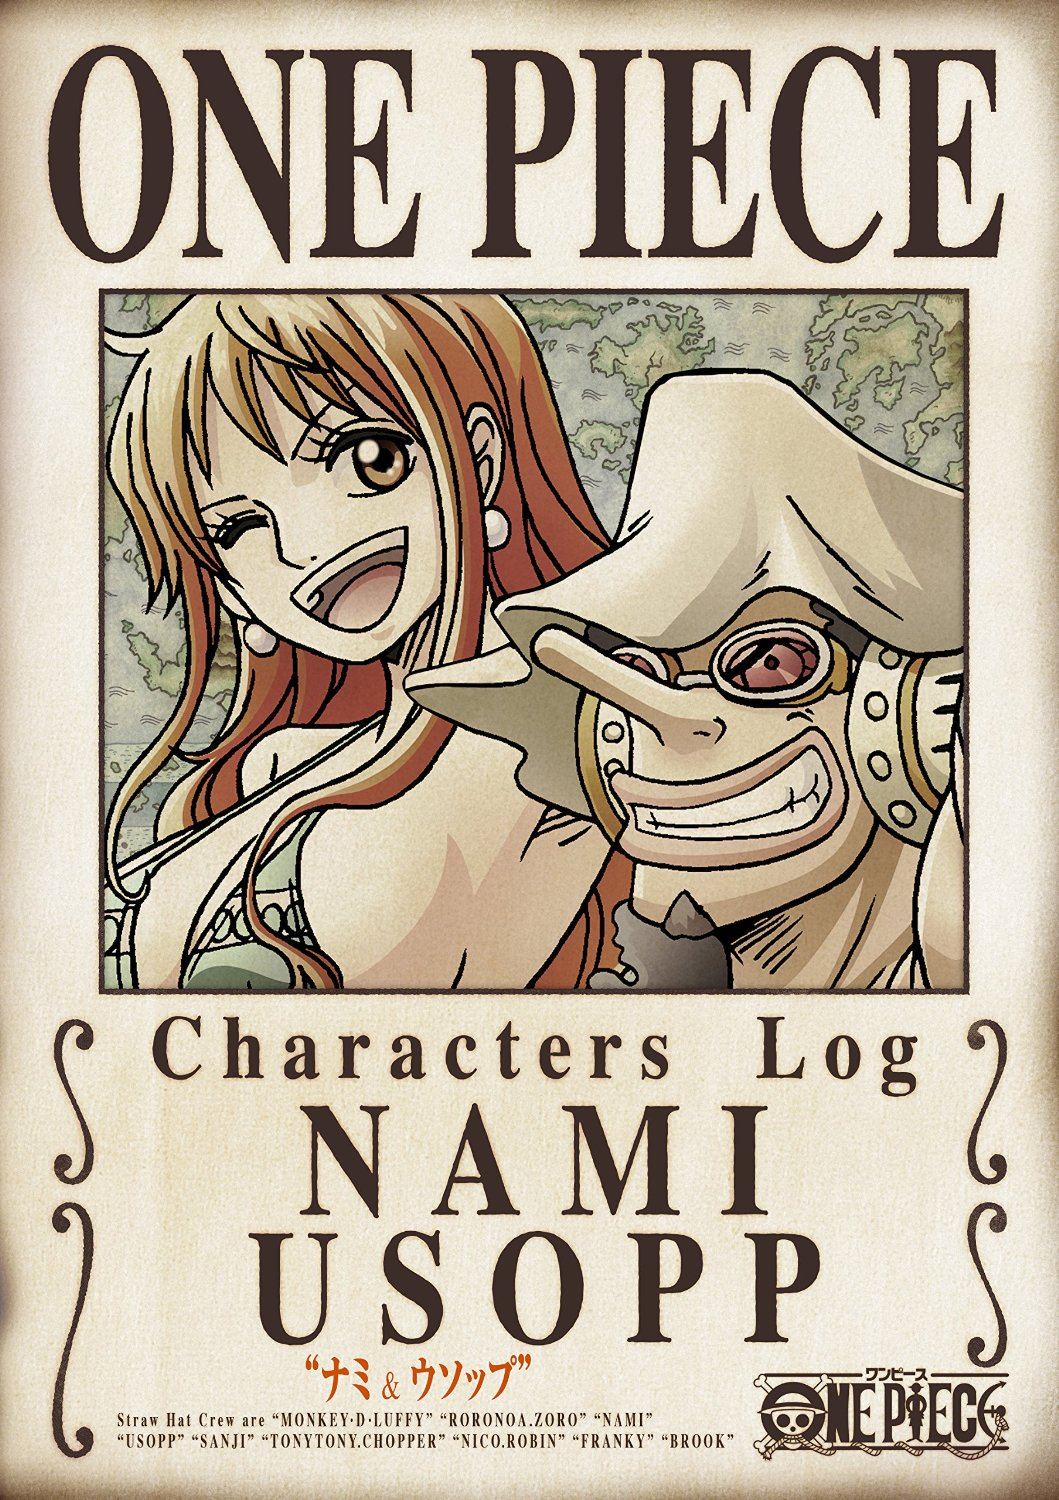 One Piece Characters Log - Nami And Usopp